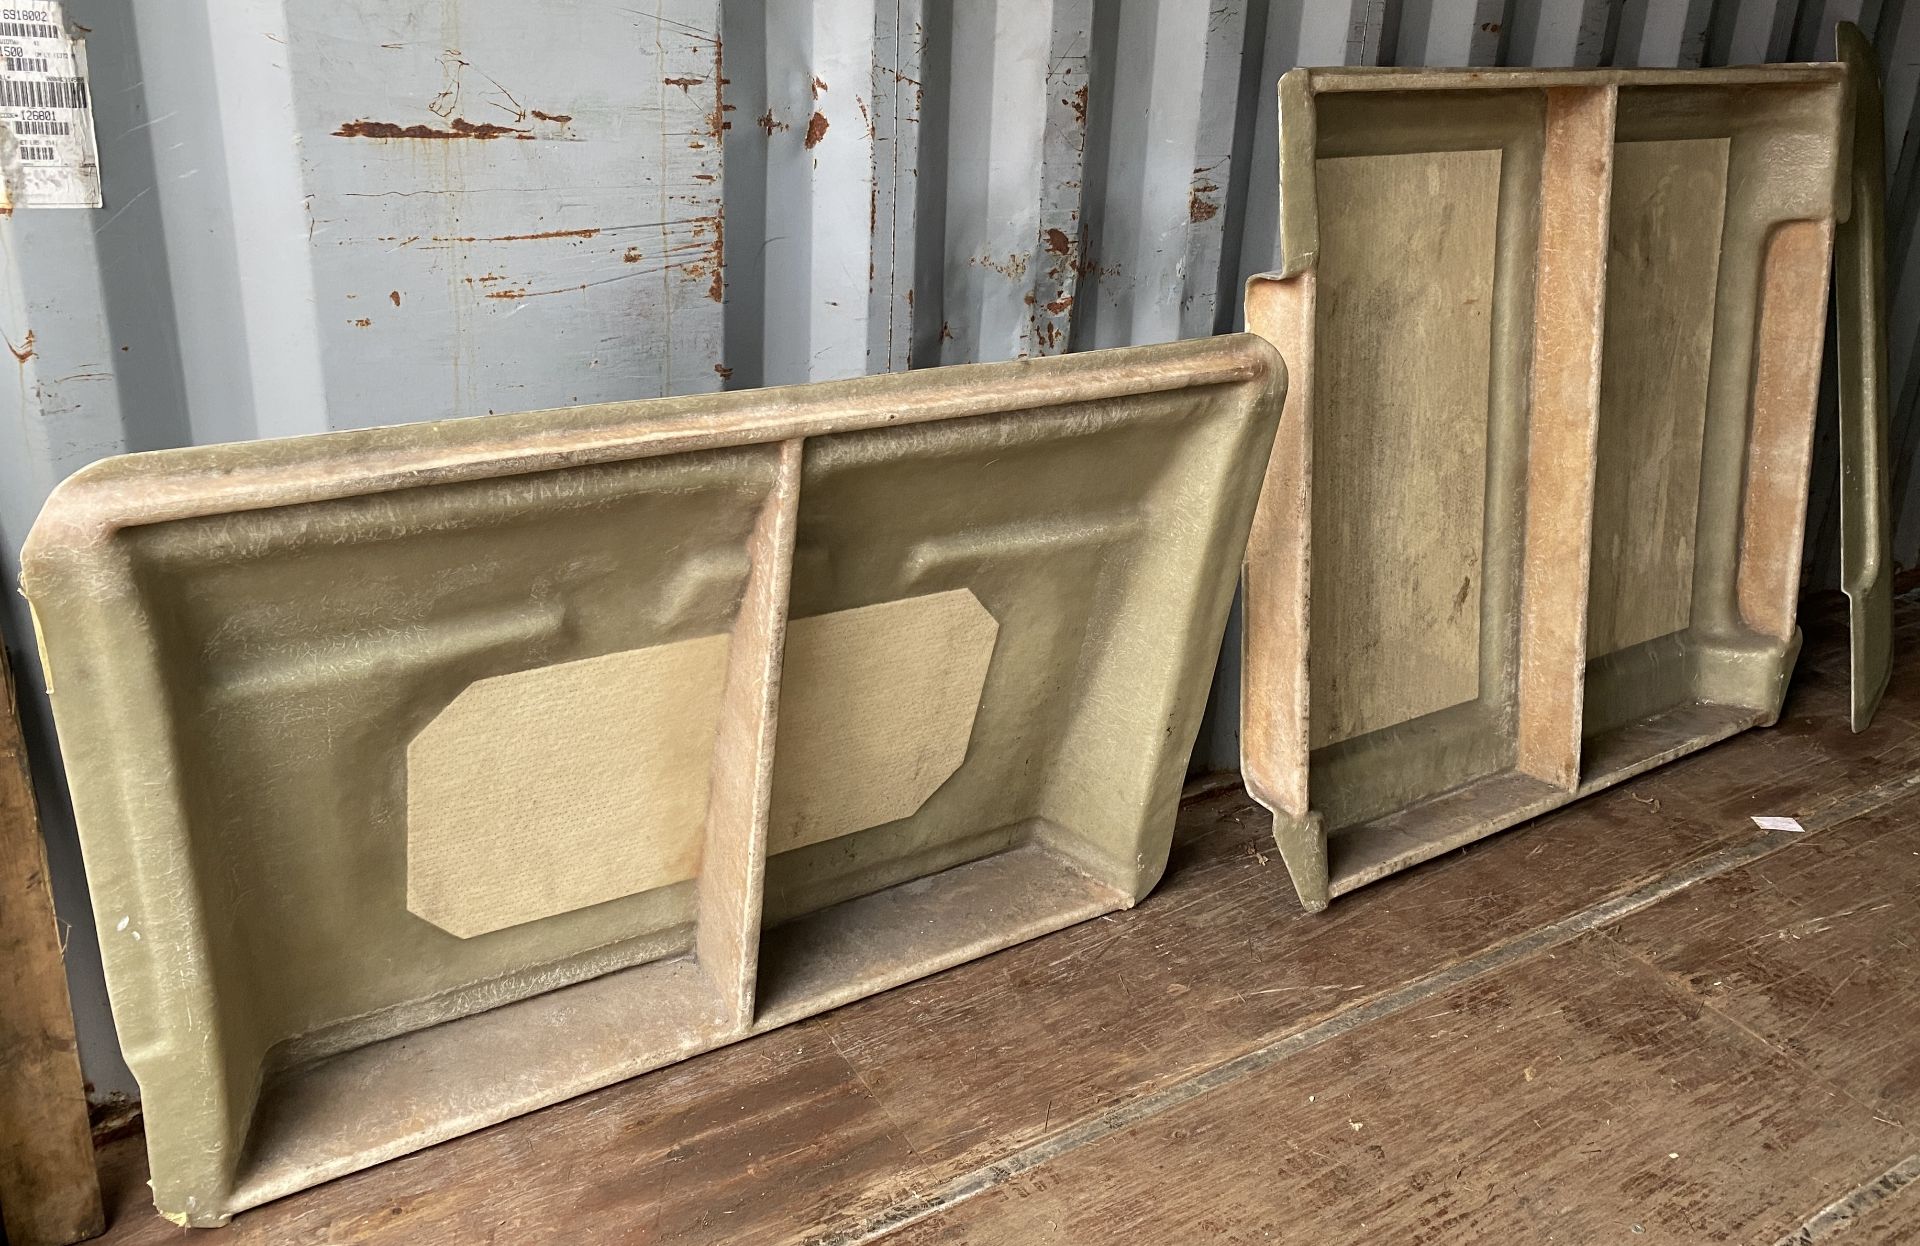 Three Landrover roof lining moulds, as viewed, possibly for a Landrover 90 or 110,